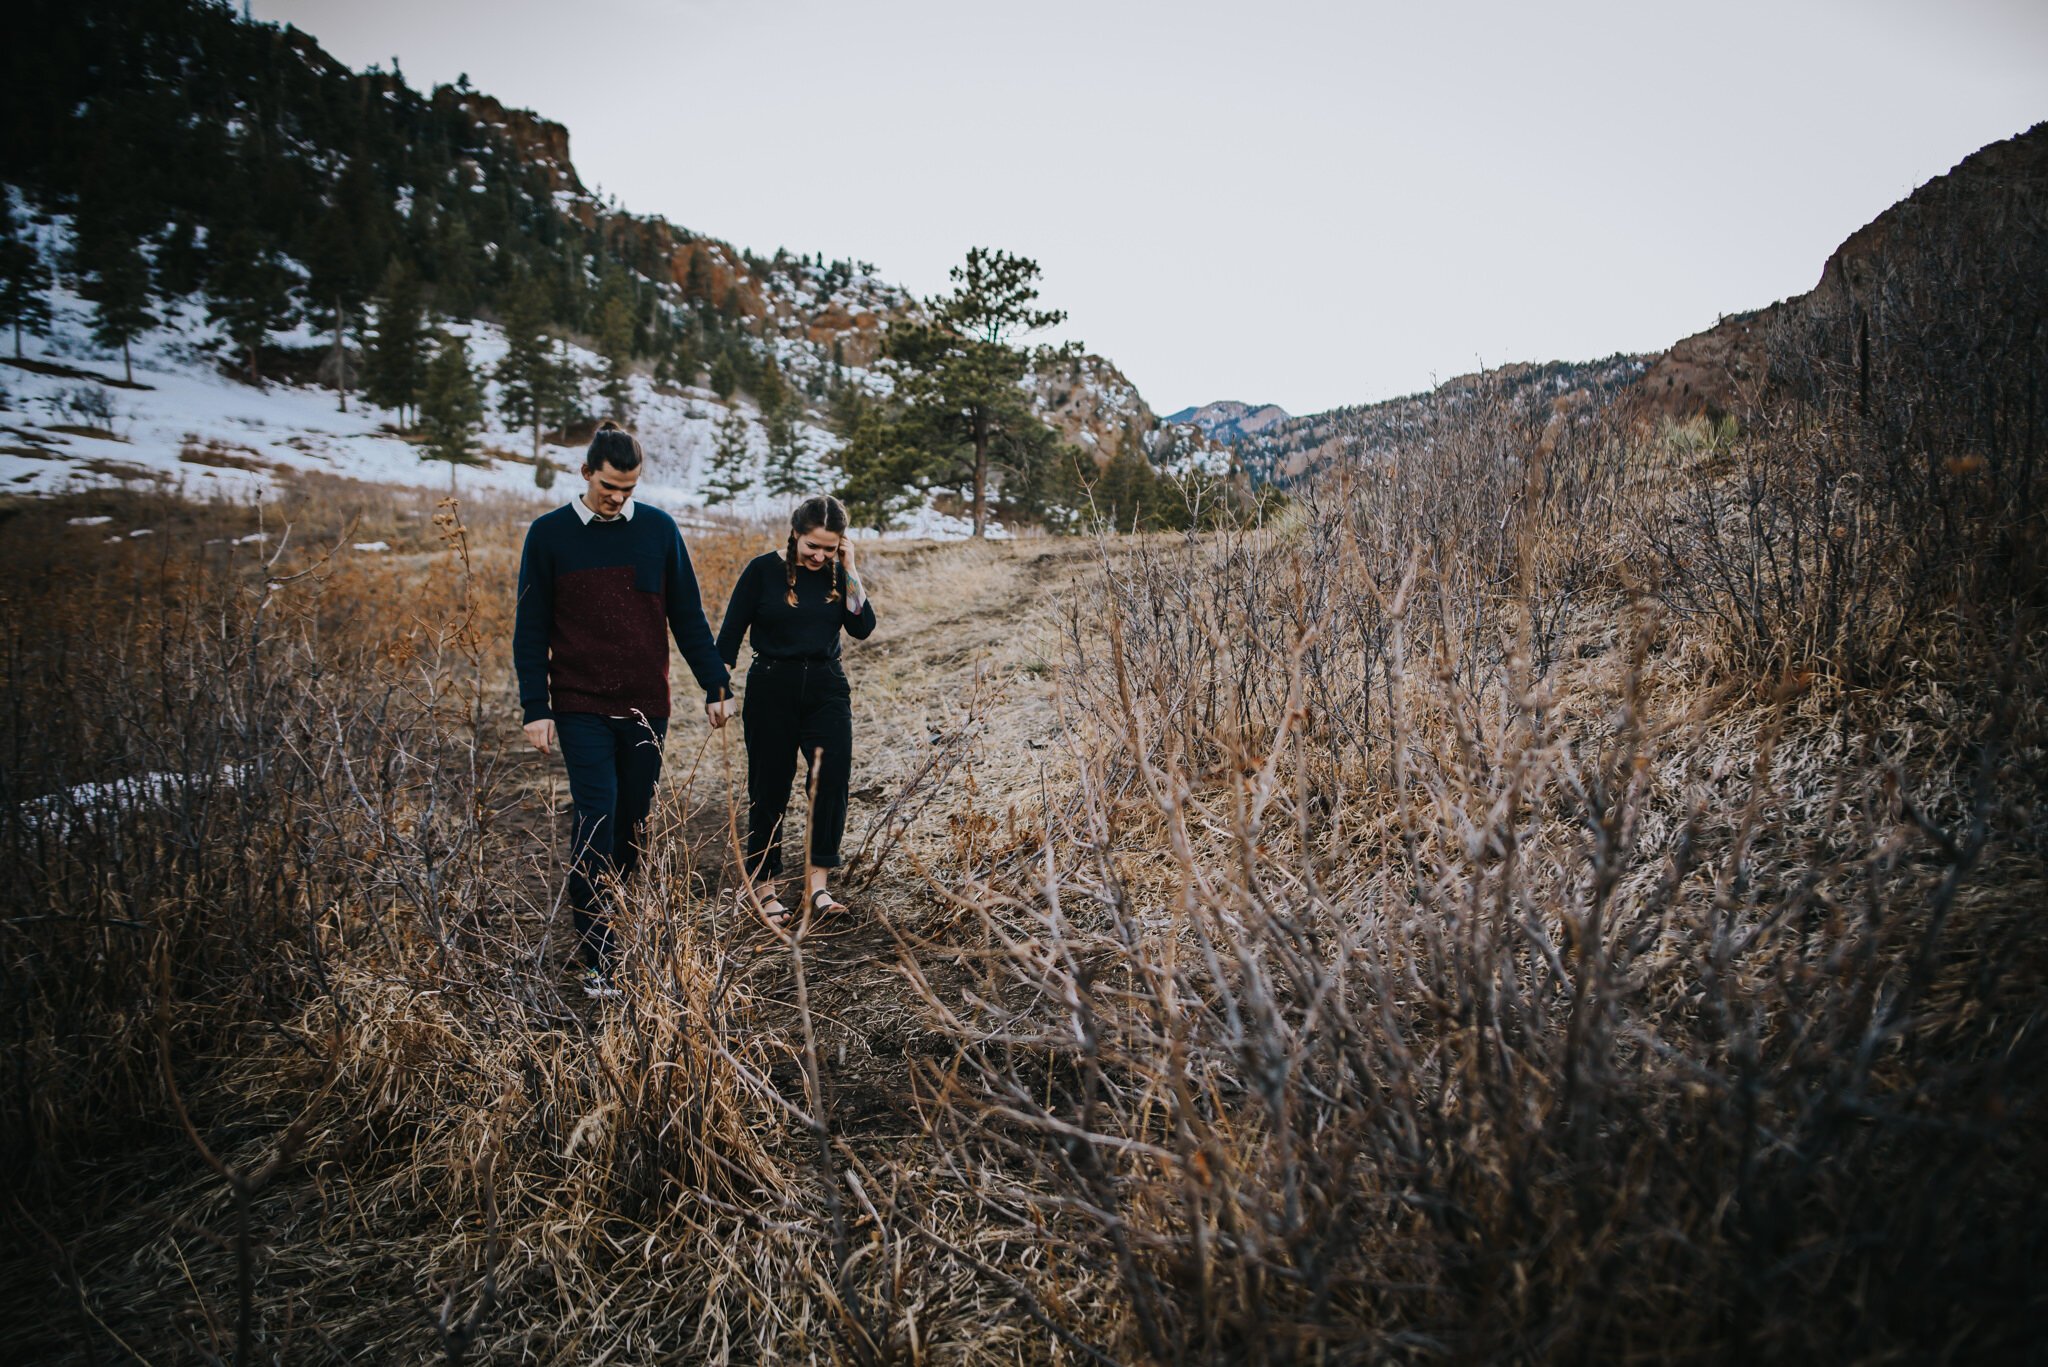 Yulia+and+Logan+Couples+Session+Colorado+Springs+Colorado+Sunset+Cheyenne+Canyon+Husband+Wife+Wild+Prairie+Photography-30-2020.jpeg